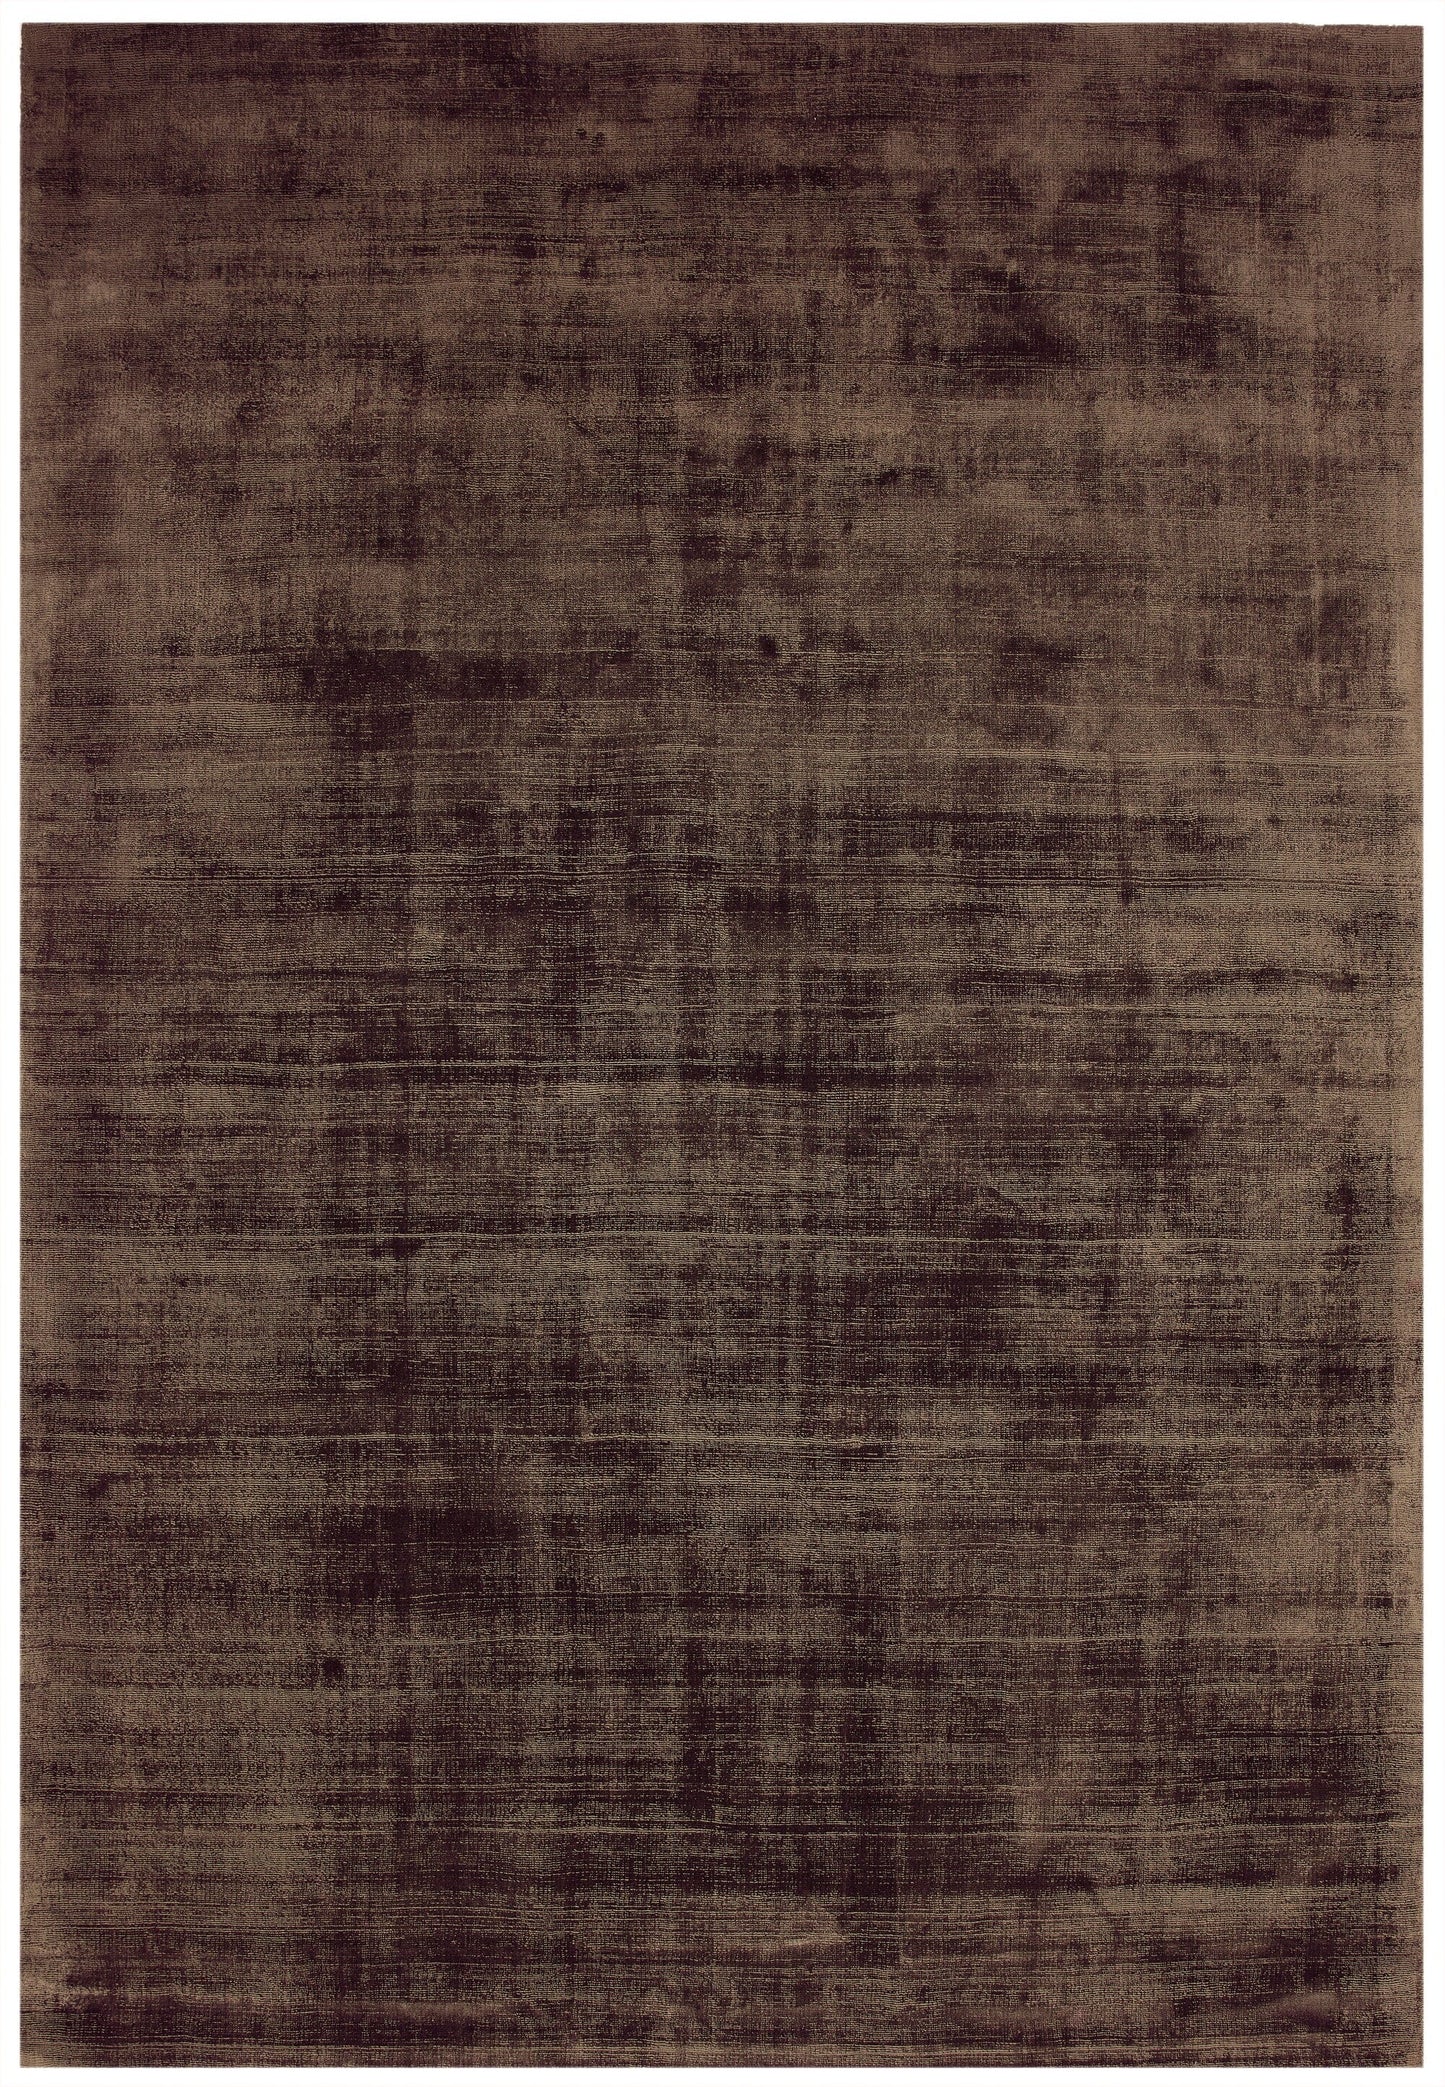 Asiatic Carpets Blade Hand Woven Rug Chocolate - 240 x 340cm